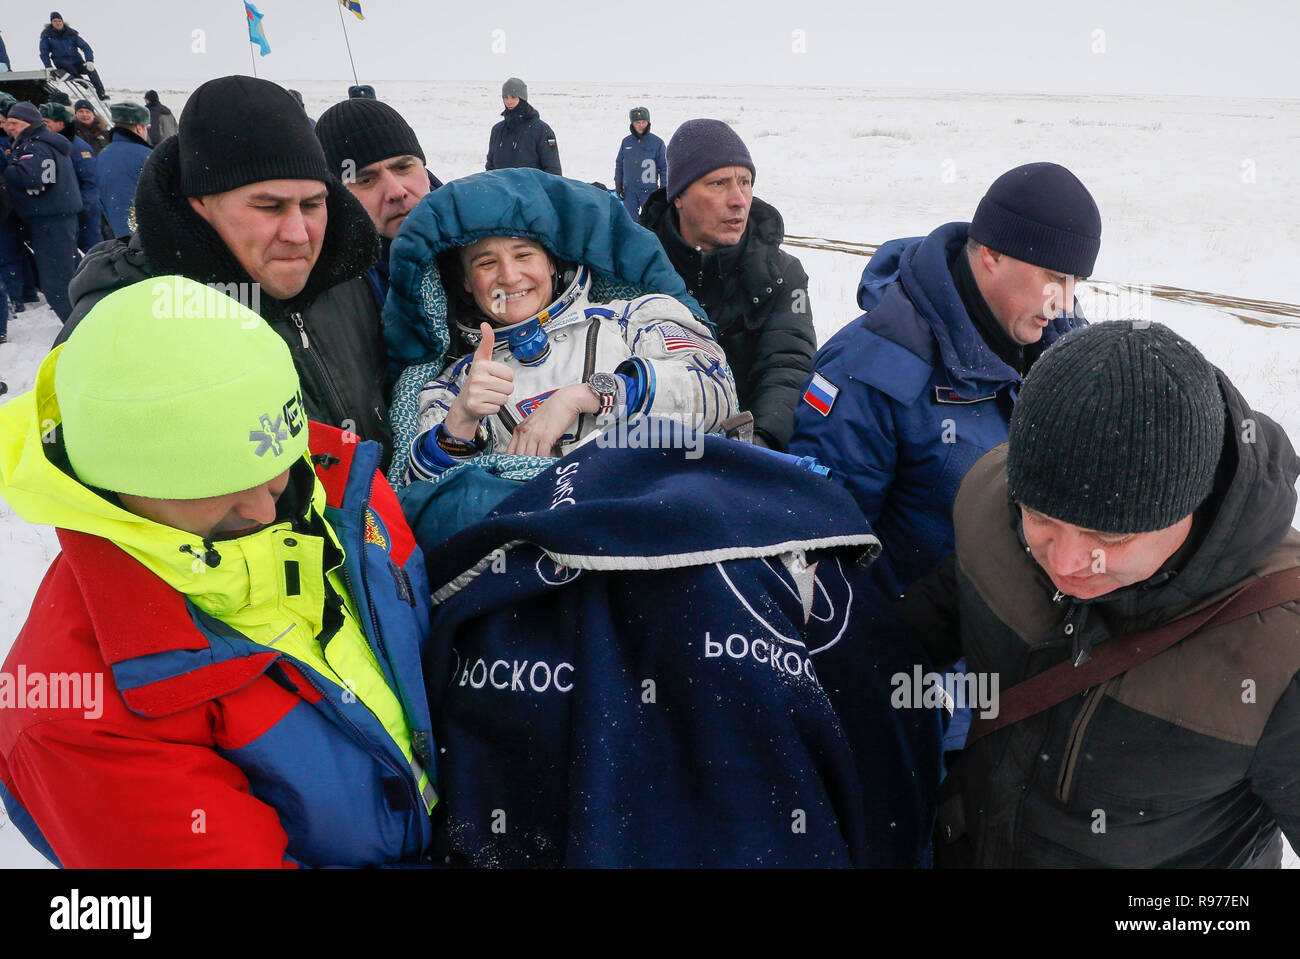 Ground personnel help NASA's Serena Aunon-Chancellor after landing in a remote area outside the town of Zhezkazgan, formerly known as Dzhezkazgan, Kazakhstan, on Thursday, Dec. 20, 2018. Three astronauts have returned to Earth after more than six months aboard the International Space Station. (Shamil Zhumatov/Pool via AP) Stock Photo